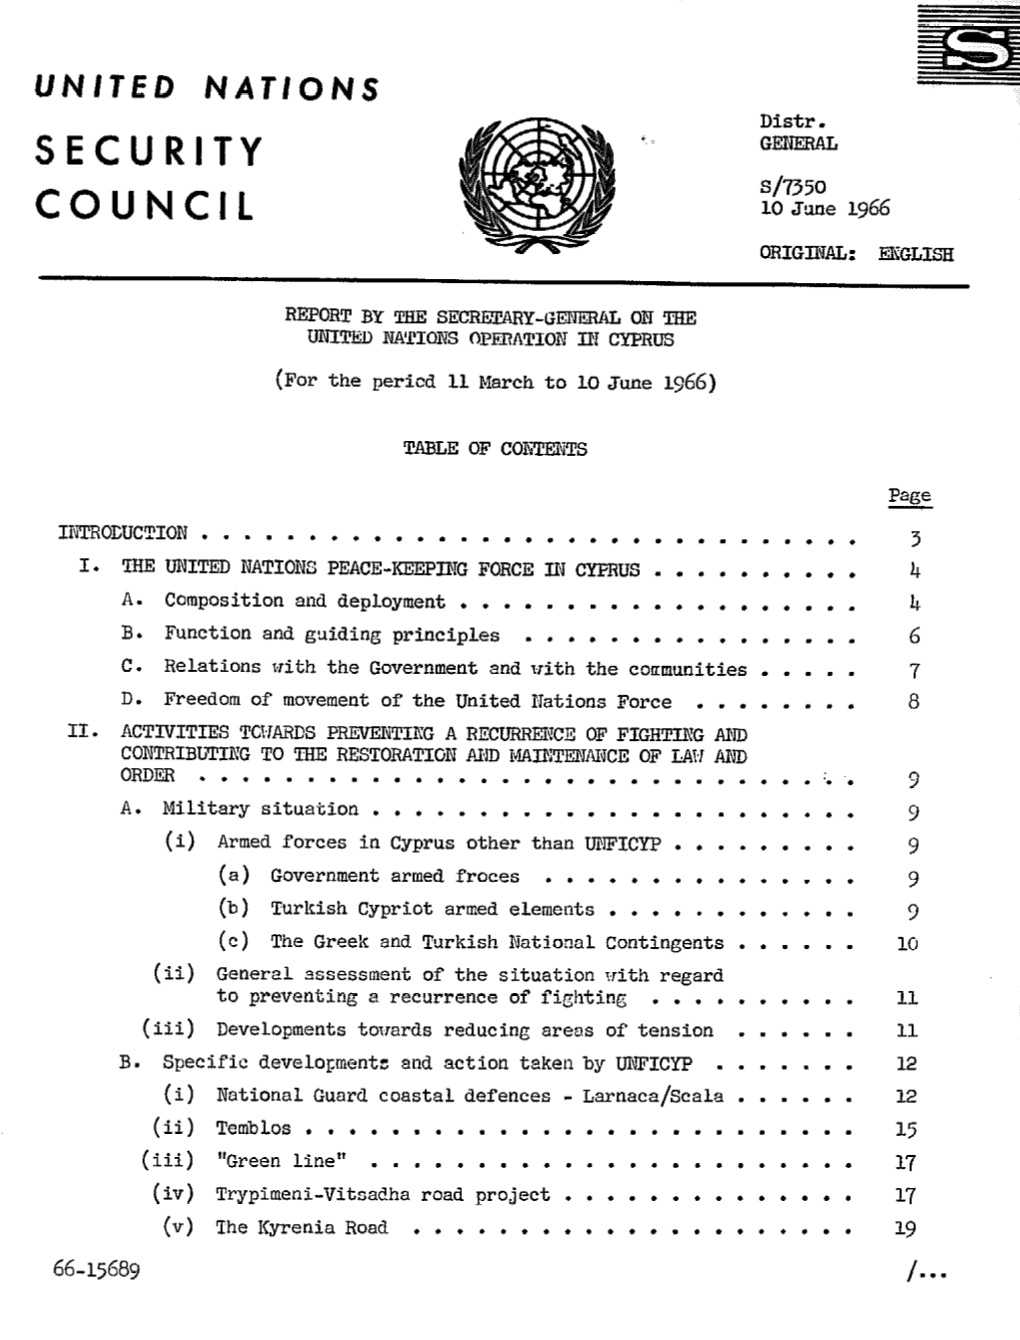 Security Council Resolution of 4 March 19@T and Subsequent Resolutions of the Council Relating to Cyprus